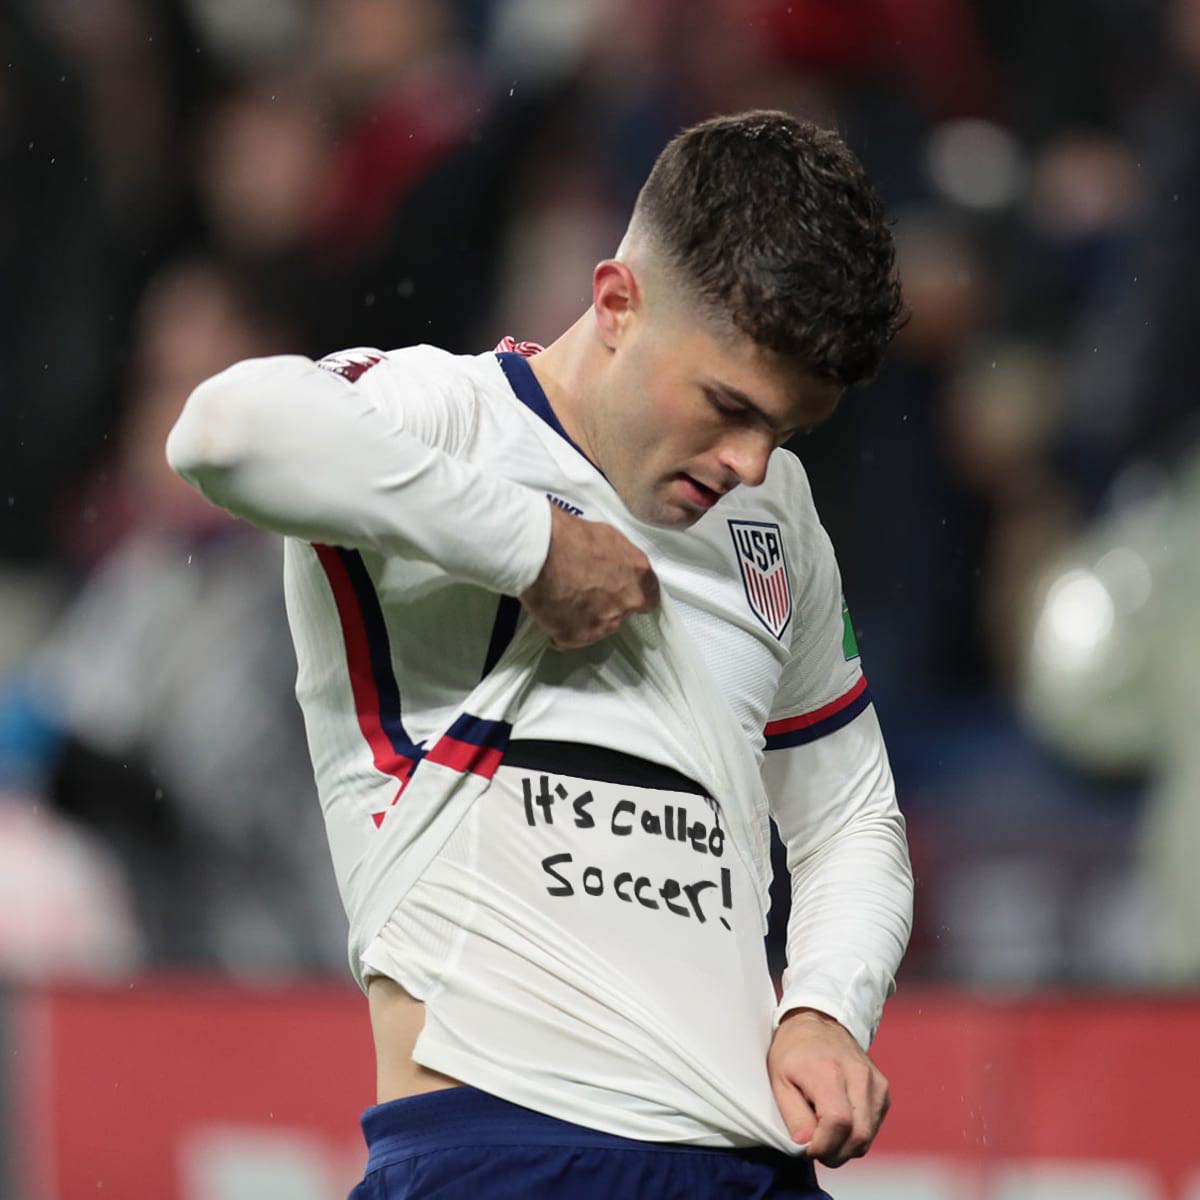 Ben Wright on X: 'November 25, 2022. The USMNT's Christian Pulisic scores a  stoppage time winner against England in the World Cup matchup, lifting his  jersey to reveal a hand-drawn message underneath.